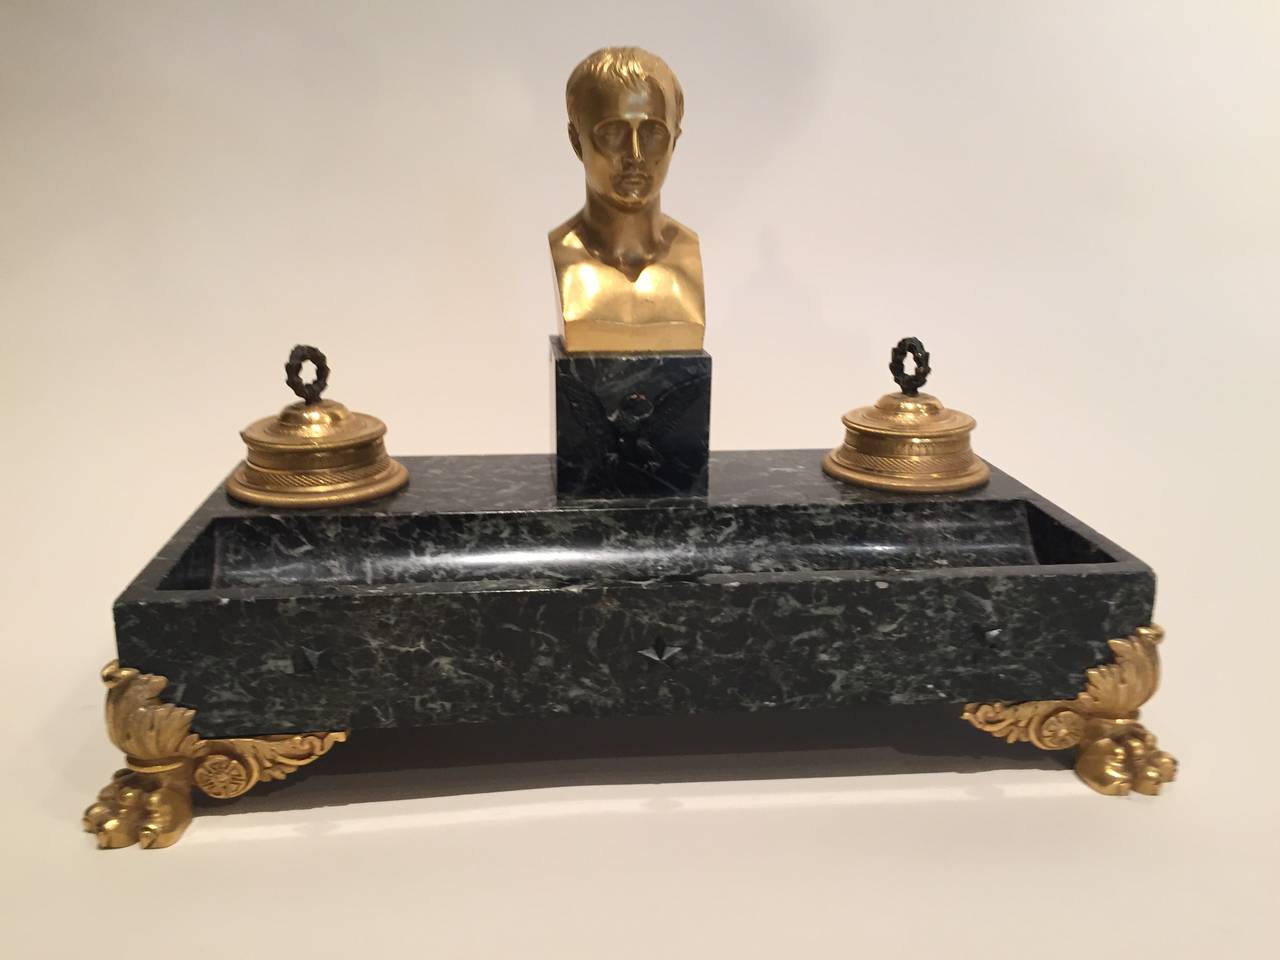 Inkwell Imposing Bust of Napoleon, Paris Napoleon III Period Circa 1850
Impressive inkwell Empire style of Empire, composed of massive sea green marble and gilded bronze. Nice work base of four lion paws feet, decorated on the front of a palm leaf